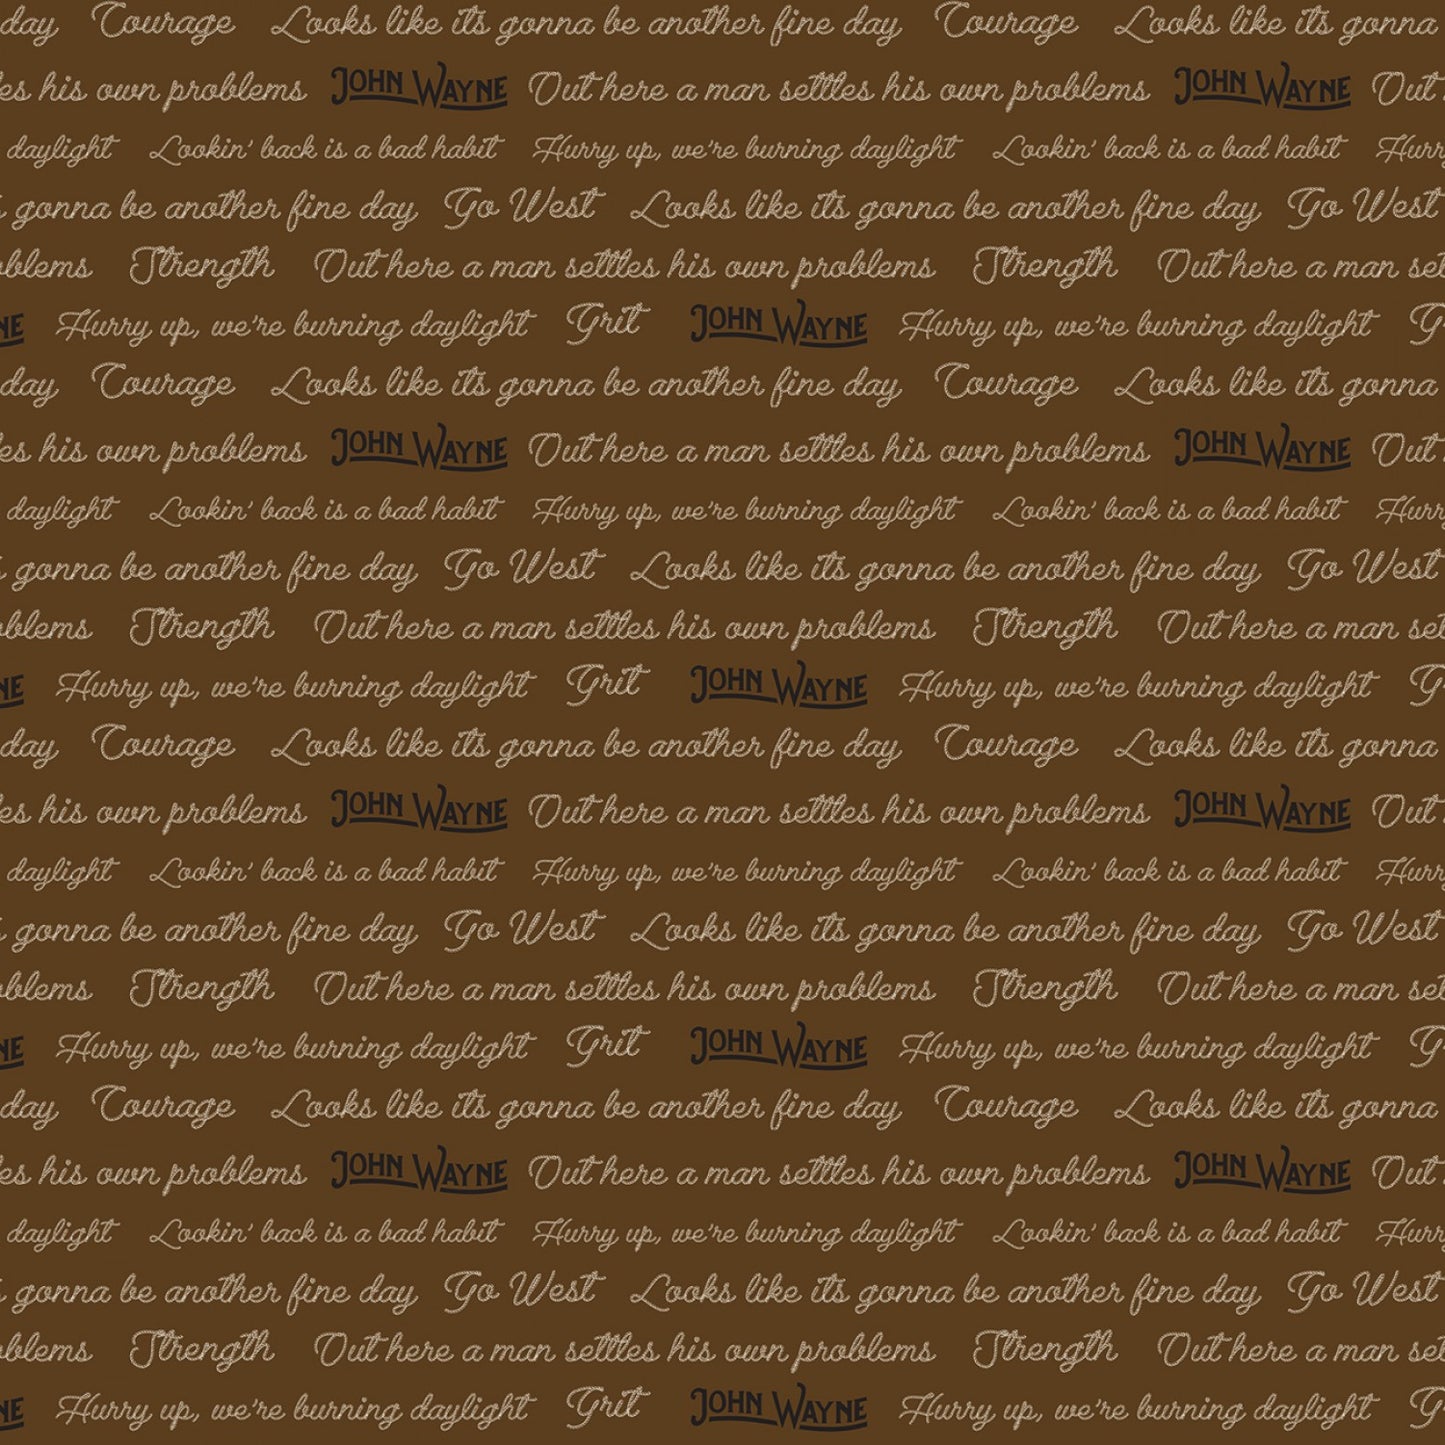 Licensed Go West with John Wayne Quotes Brown     C12193R-BROWN Cotton Woven Fabric